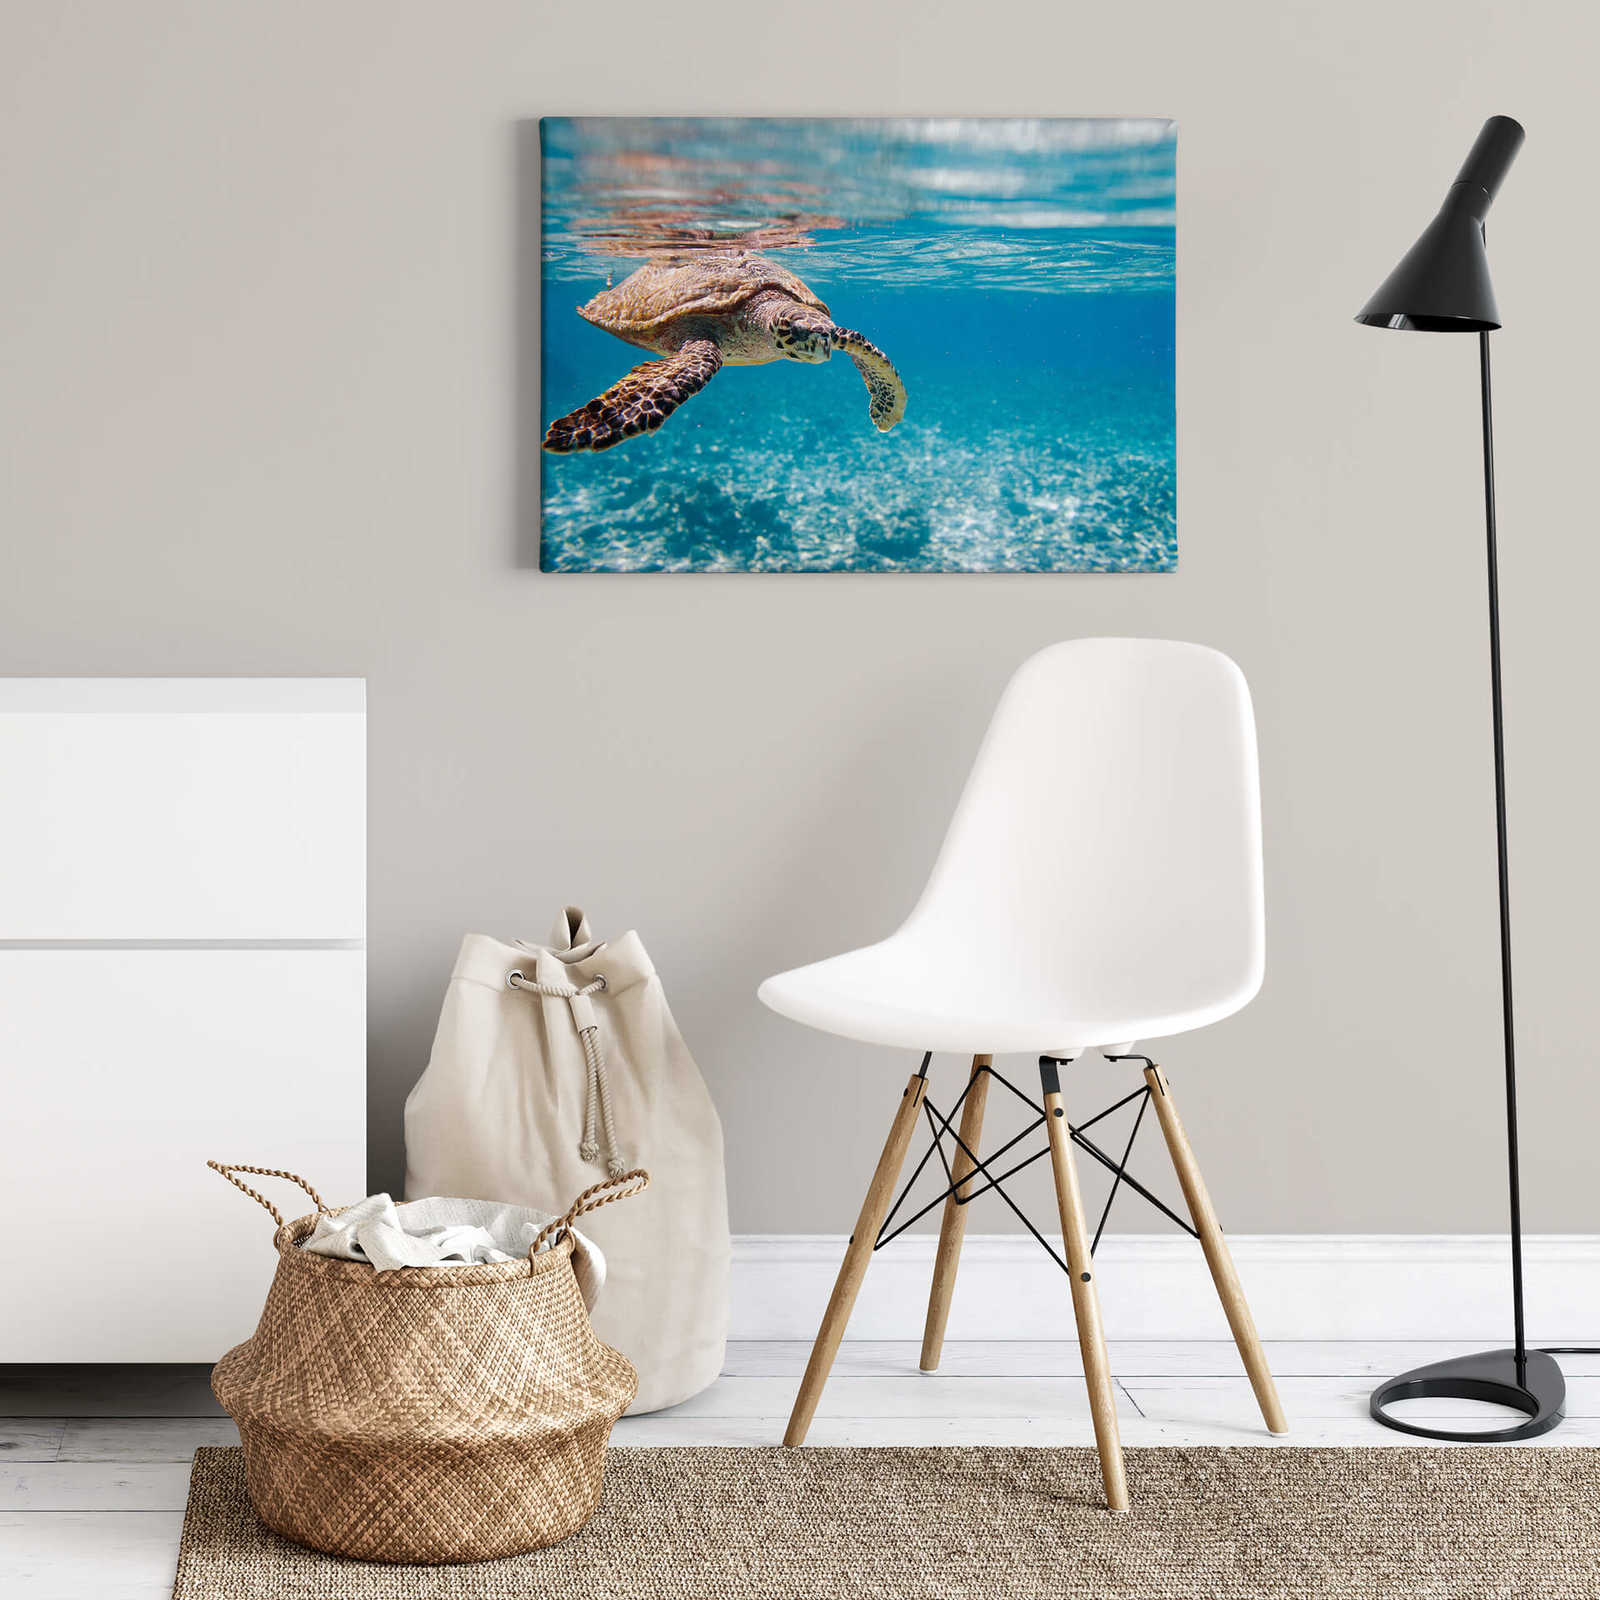             Underwater canvas print with turtle – blue
        